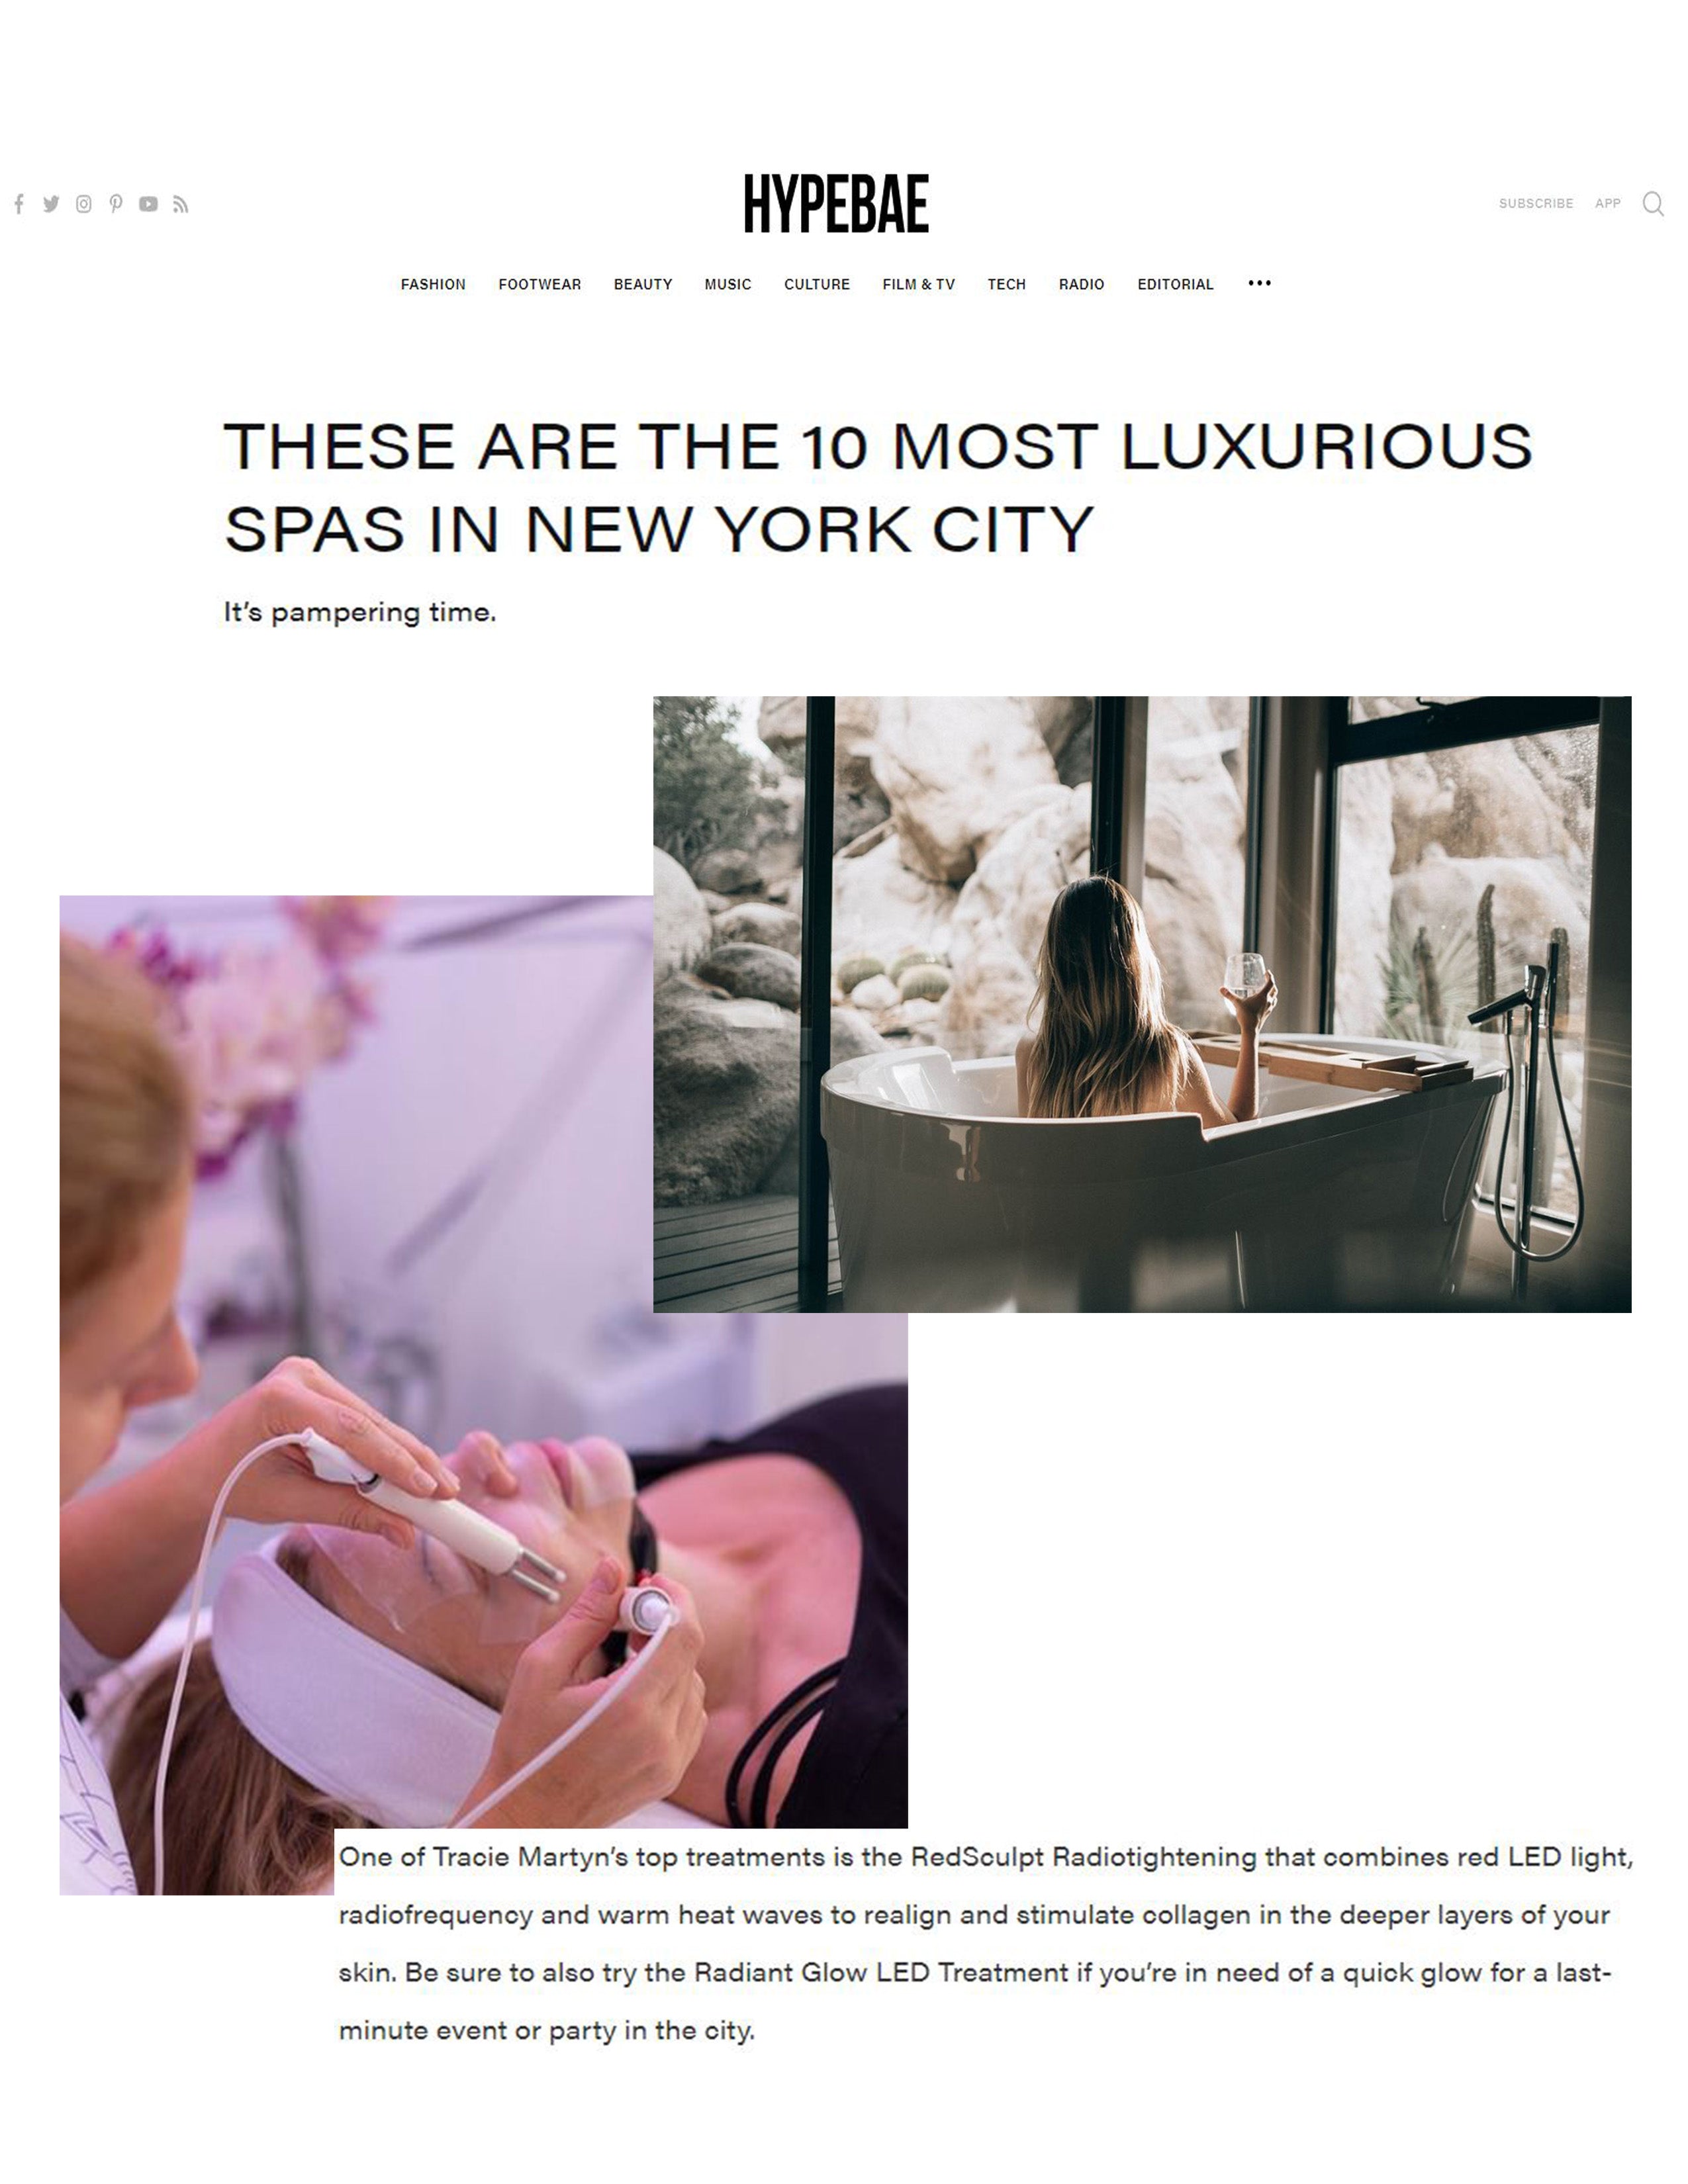 Hypebae: The Top 10 Most Luxurious Spas in NYC